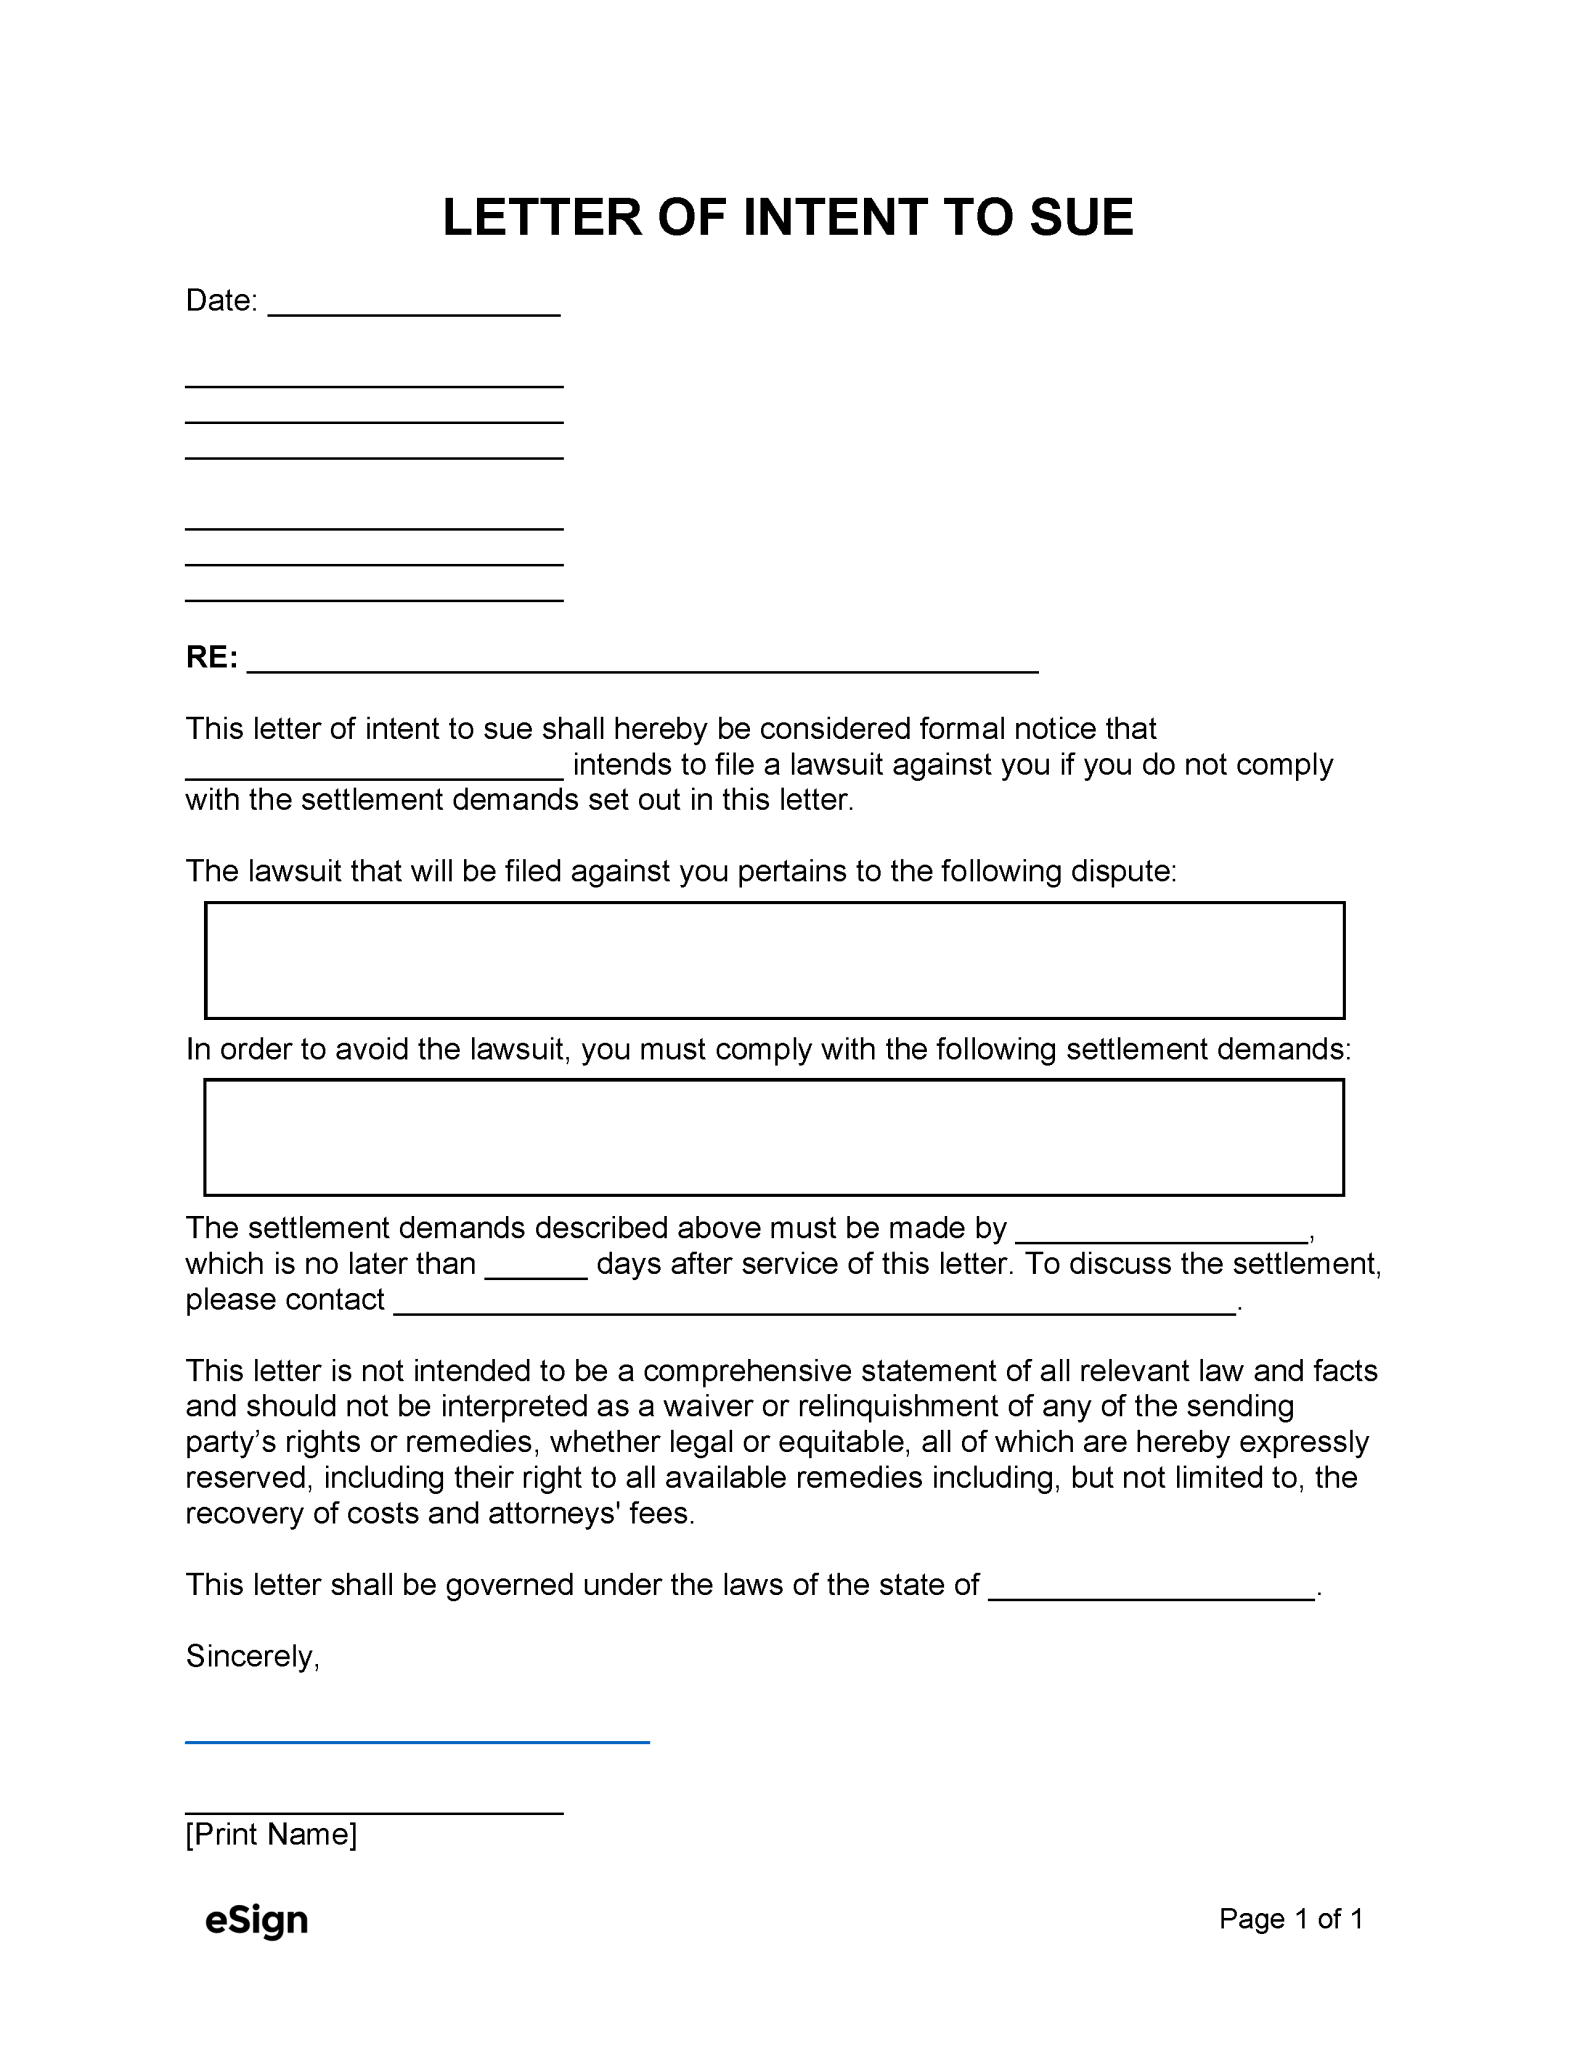 Free Letter of Intent to Sue (With Settlement Demand) PDF Word